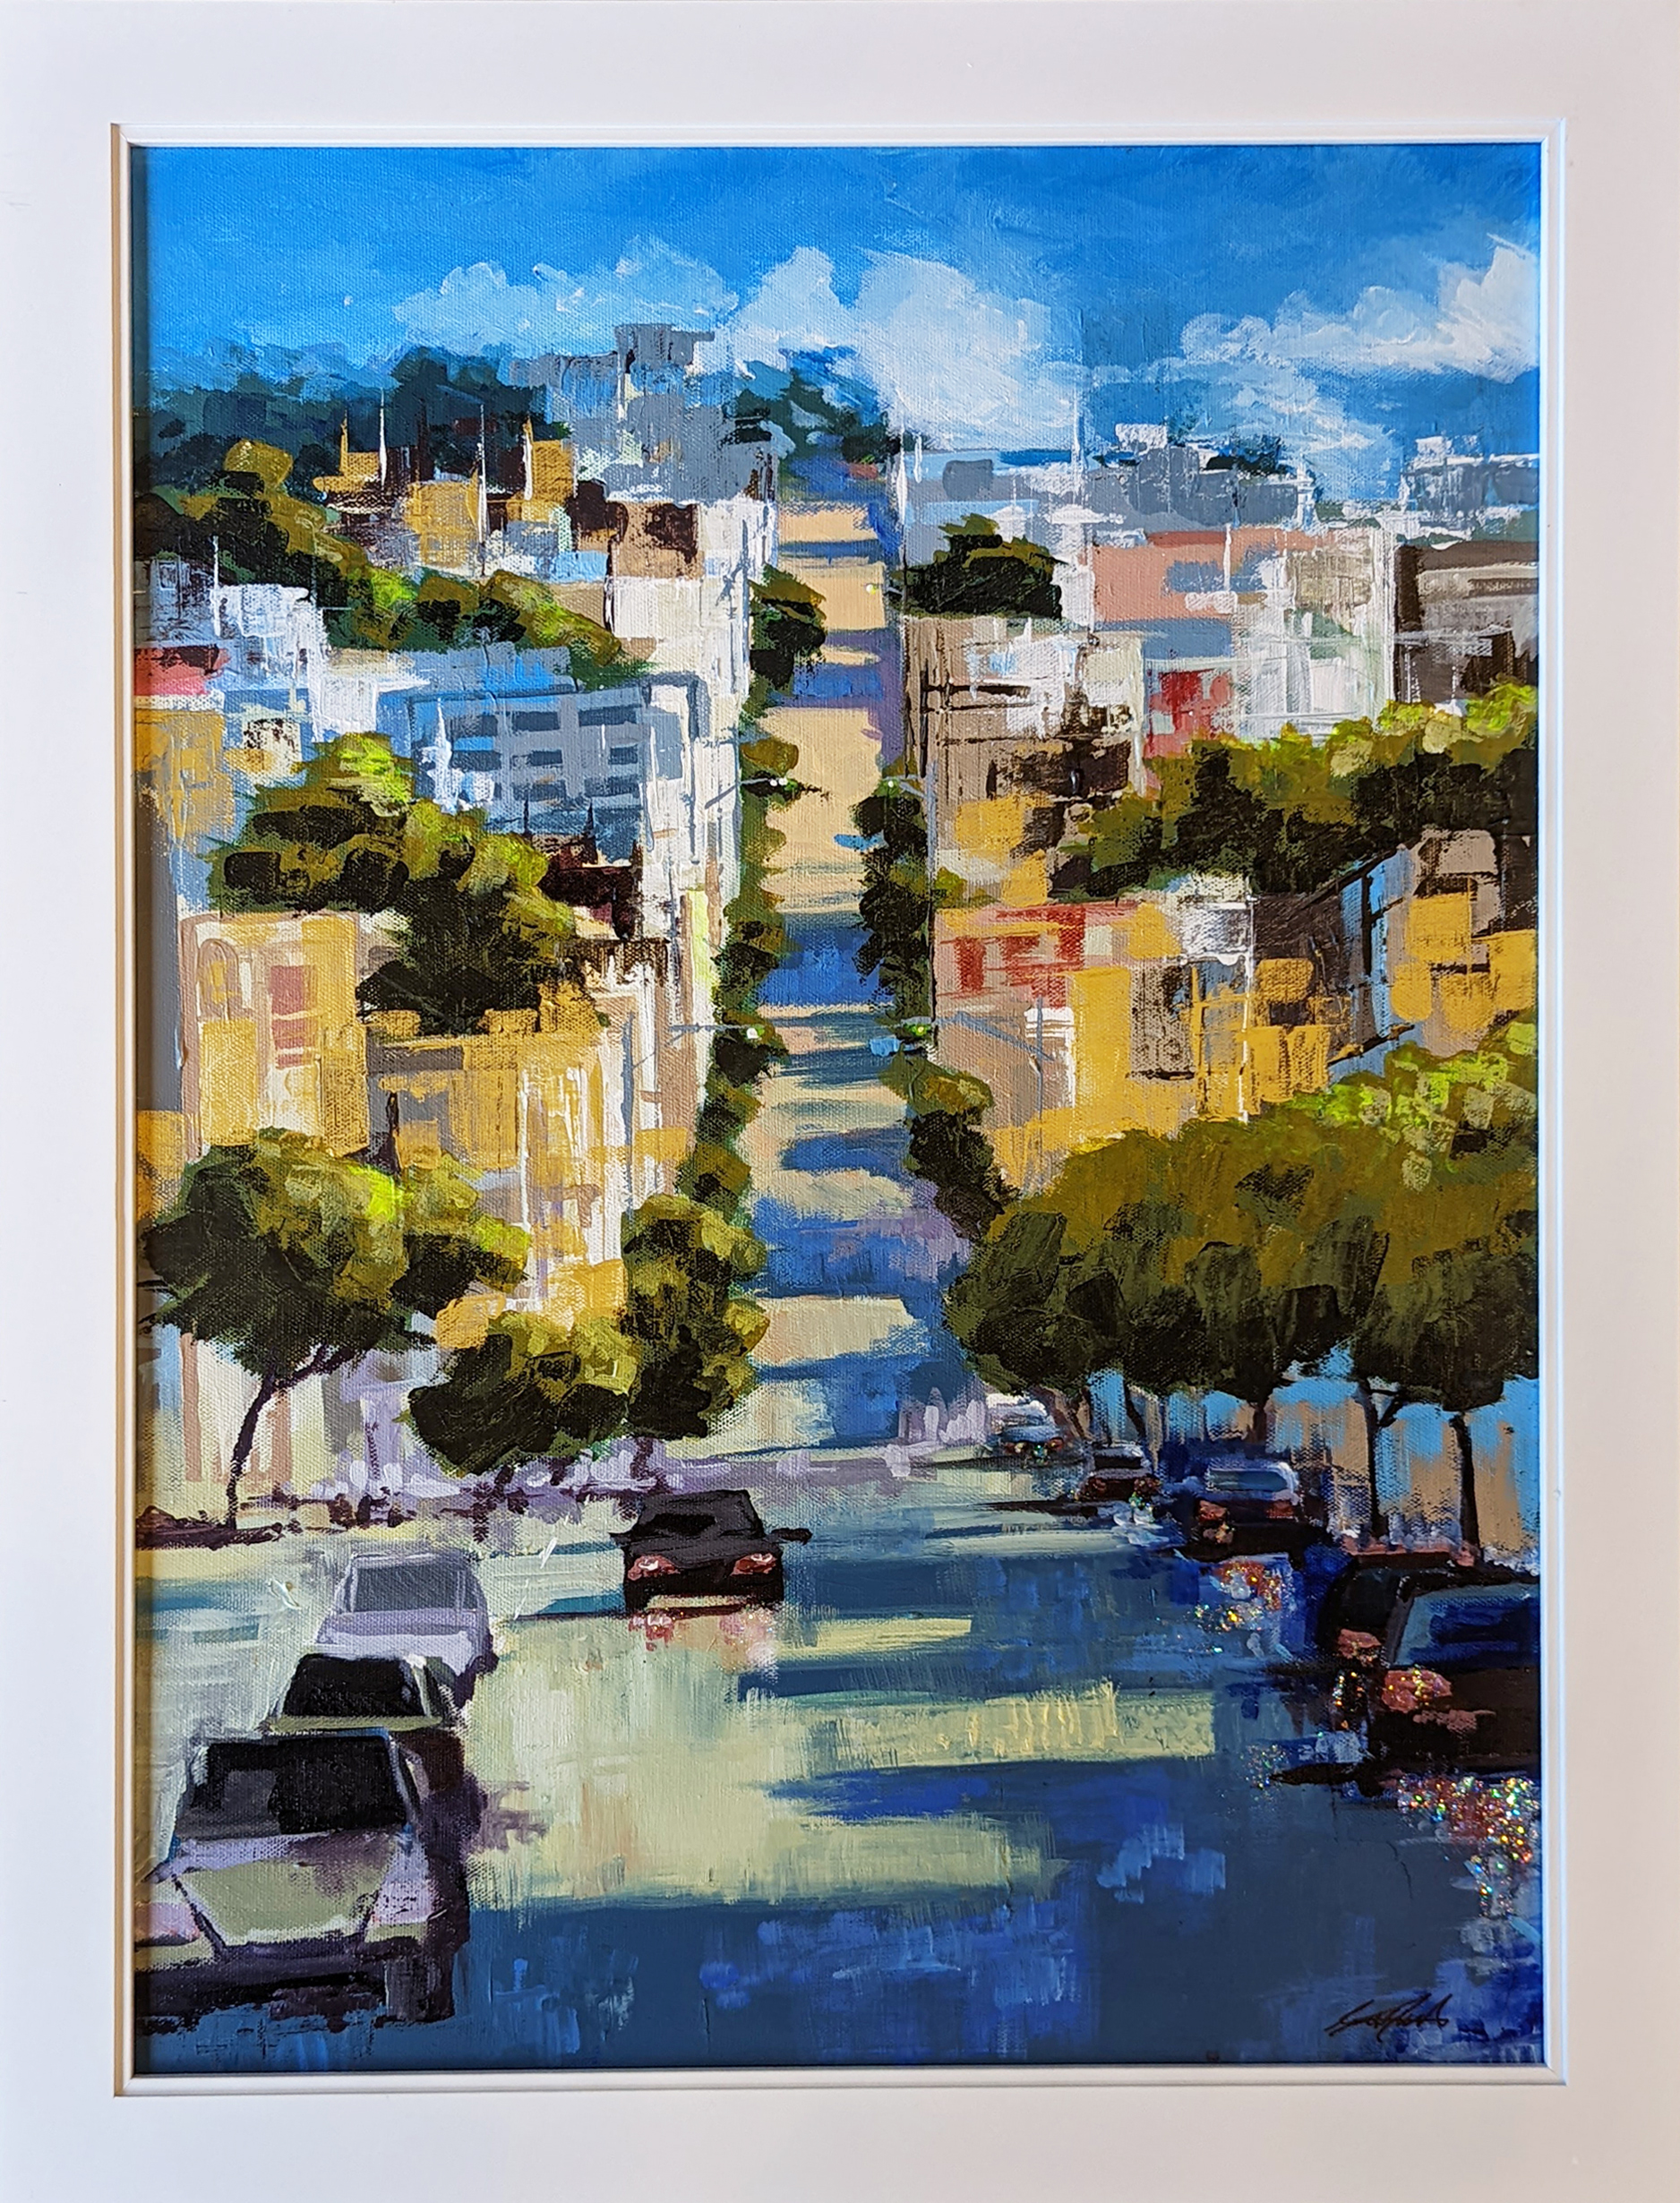 An impressionistic painting of a long sunlit urban street lined with cars, buildings and trees